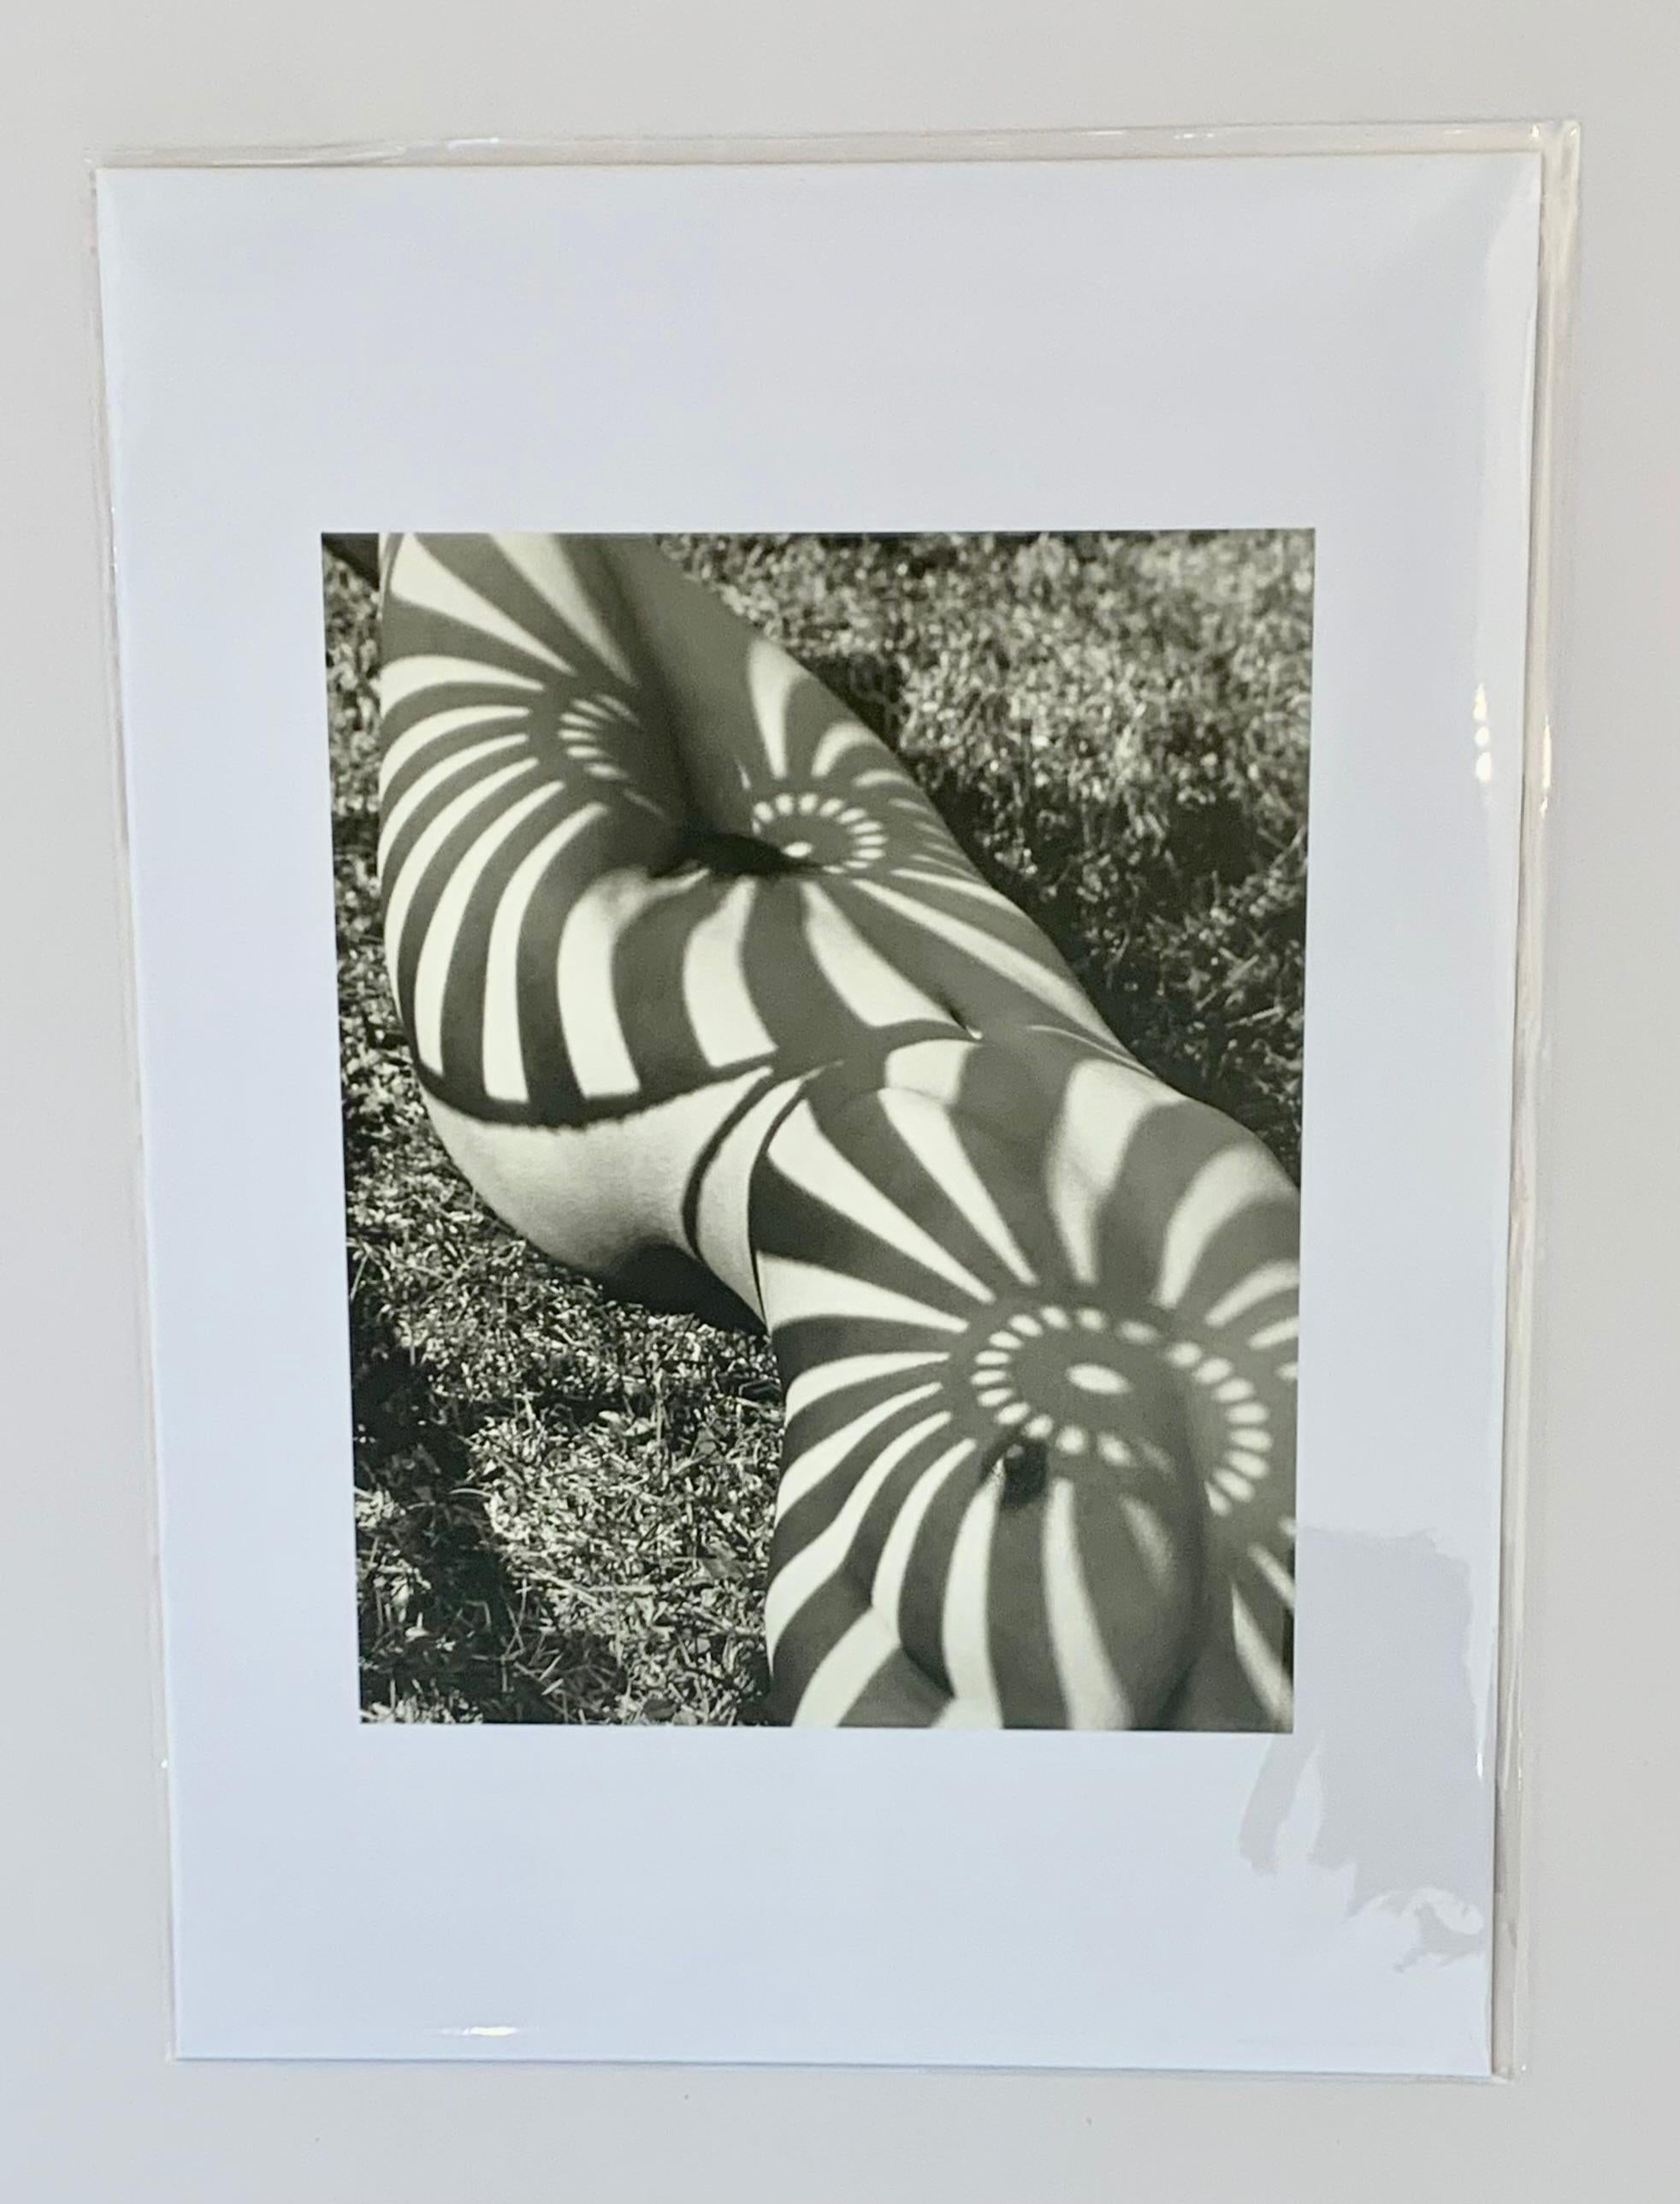 Neith with Shadows, Pound Ridge by Herb Ritts Vintage print 2